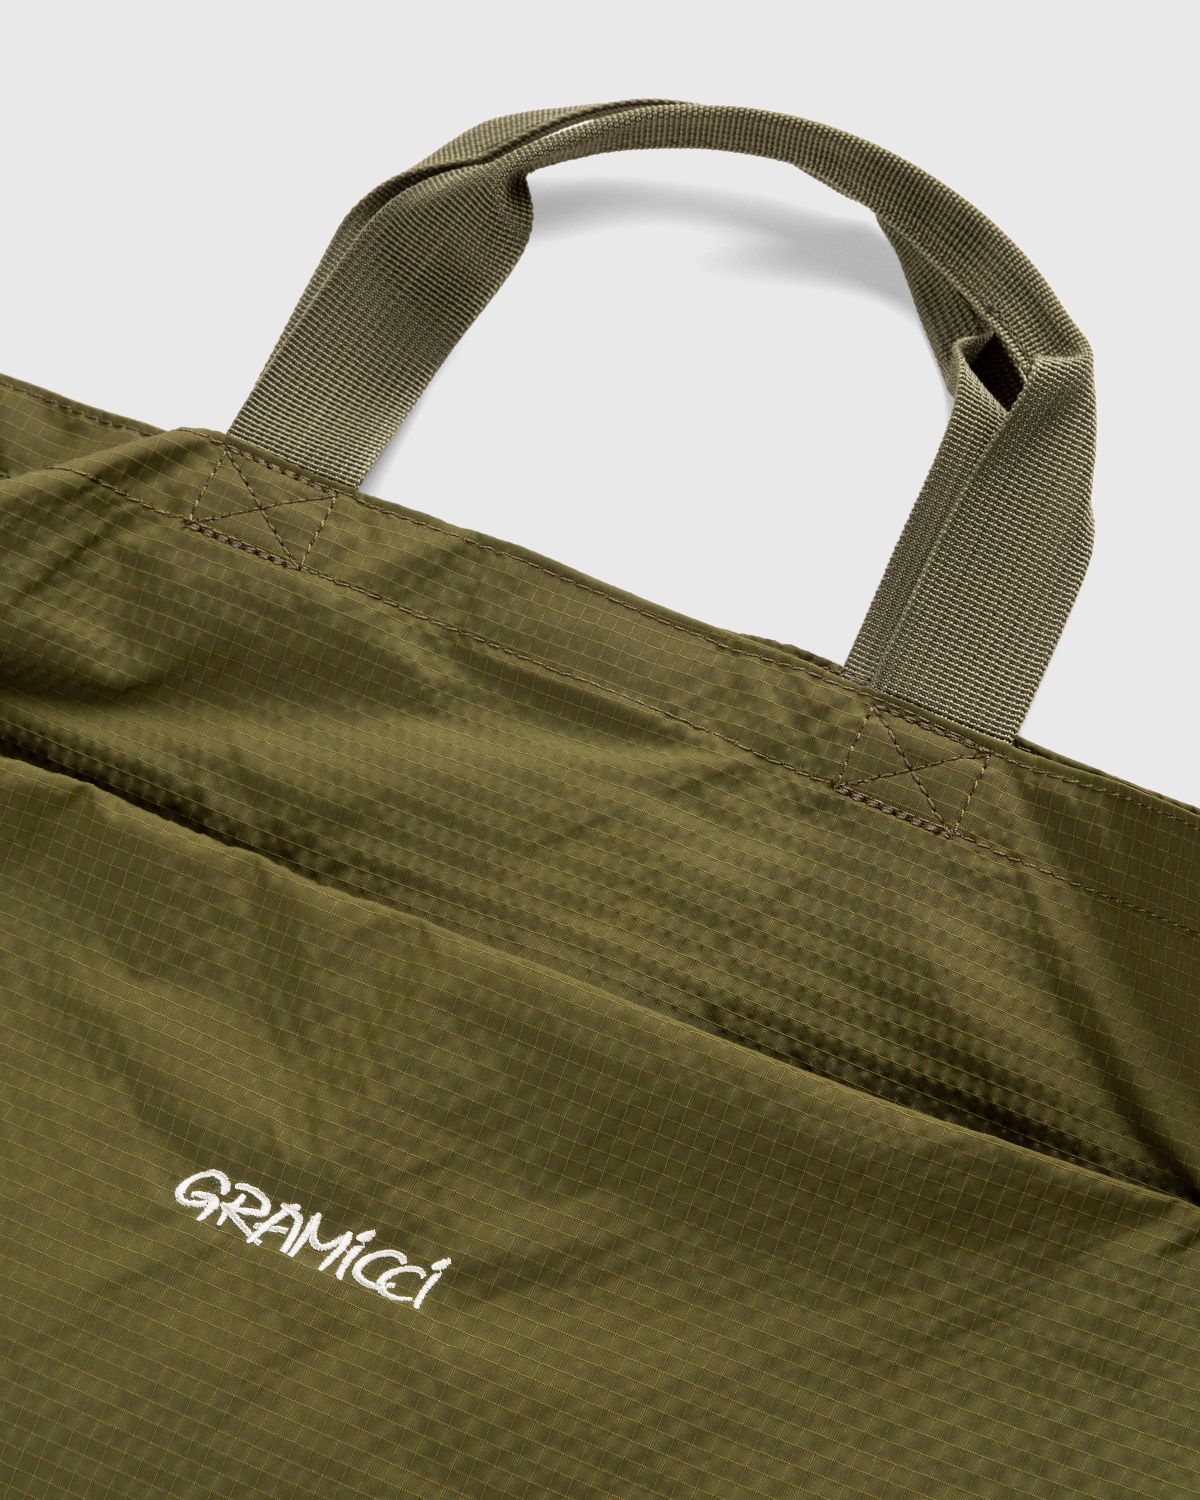 Gramicci – Utility Ripstop Tote Bag Army Green - Tote Bags - Green - Image 5